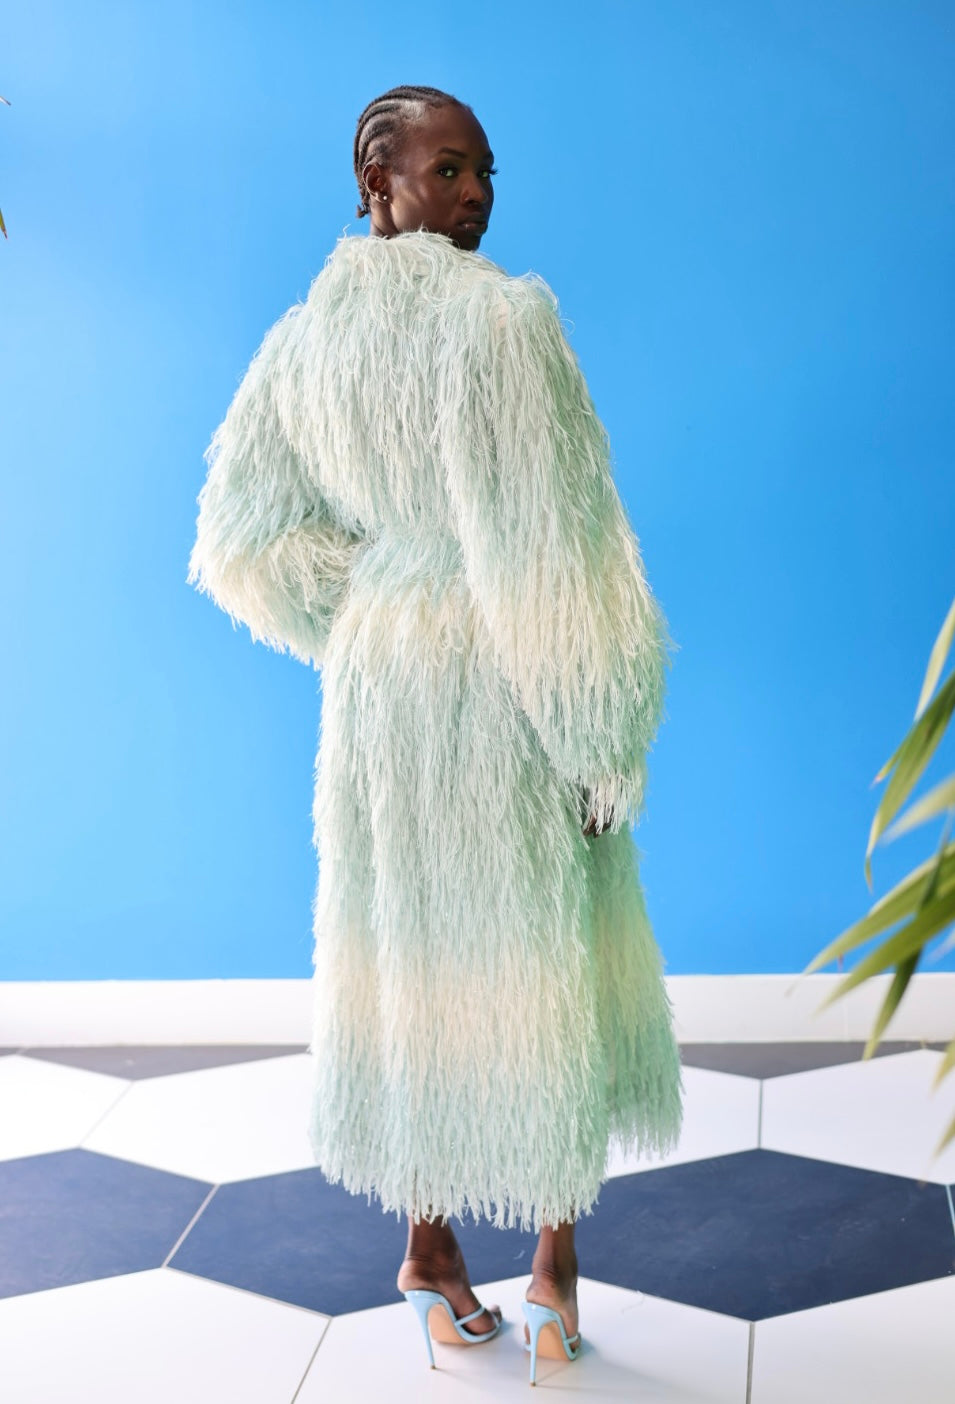 The Enola Shaggy Coat has an ombre effect from light blue to creamy white. The lantern leaves and belt offer a playful feel to the wear of this coat.